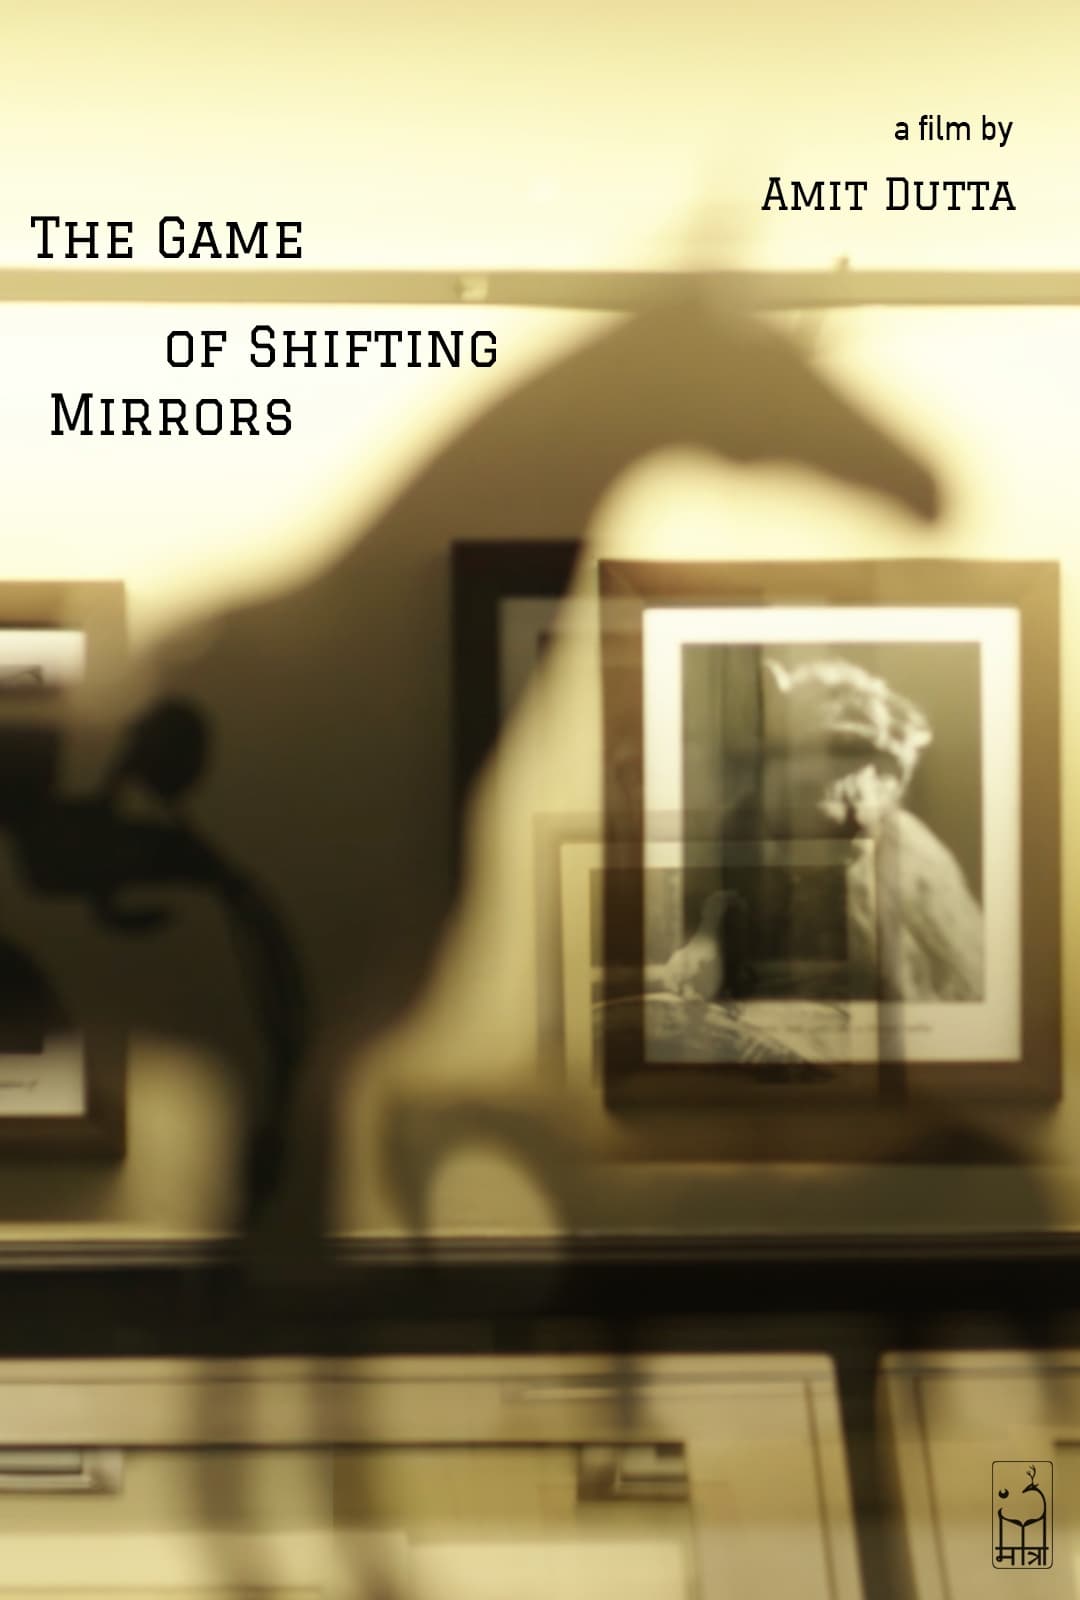 The Game of Shifting Mirrors